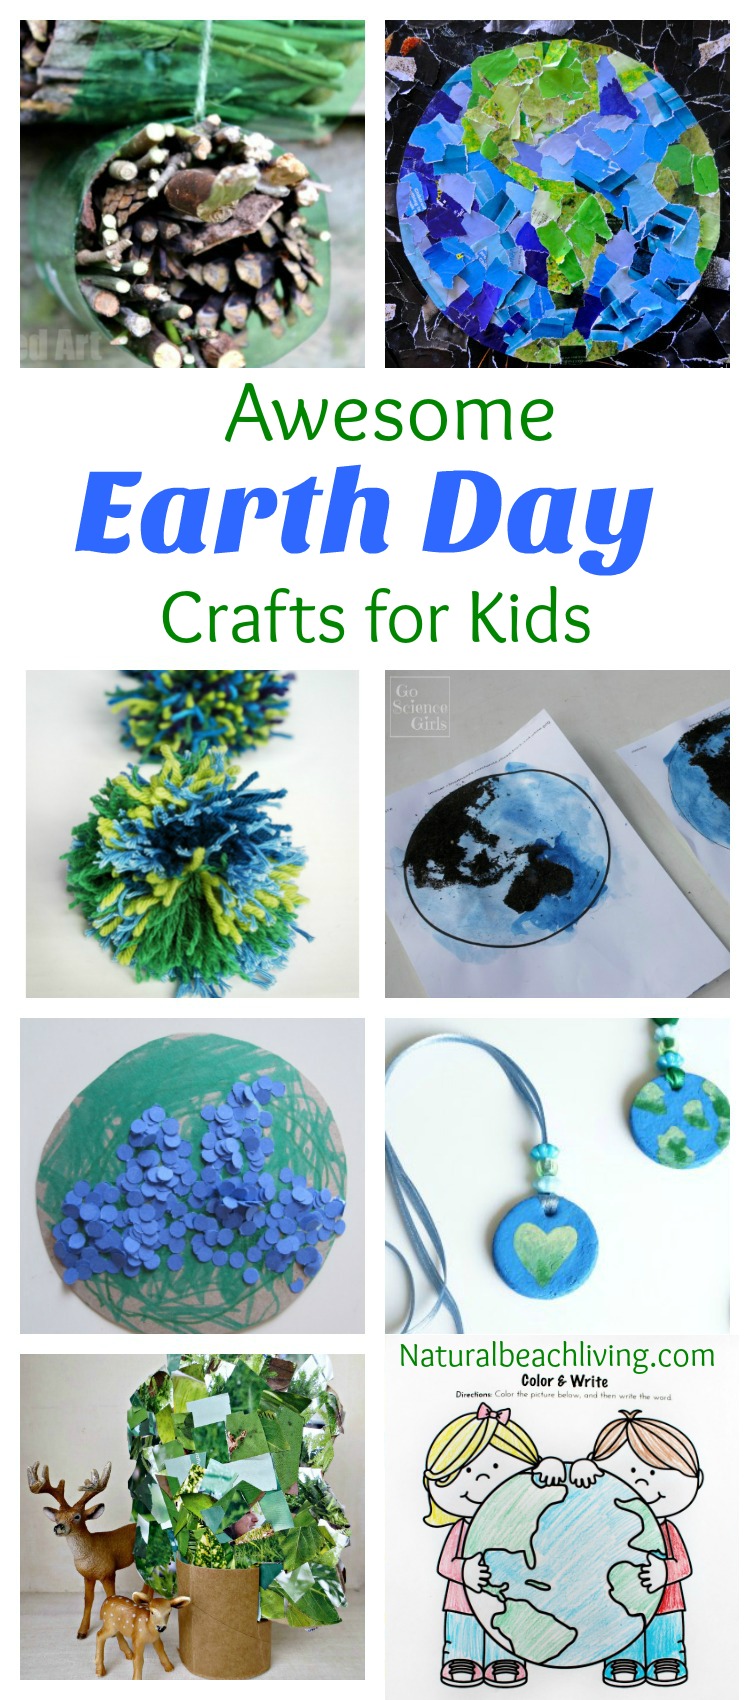 30+ Creative Earth Day Crafts for Kids, Nature crafts, Earth Day crafts for preschoolers, Earth Day ideas, Earth Day coloring pages, Salt Dough ornaments 